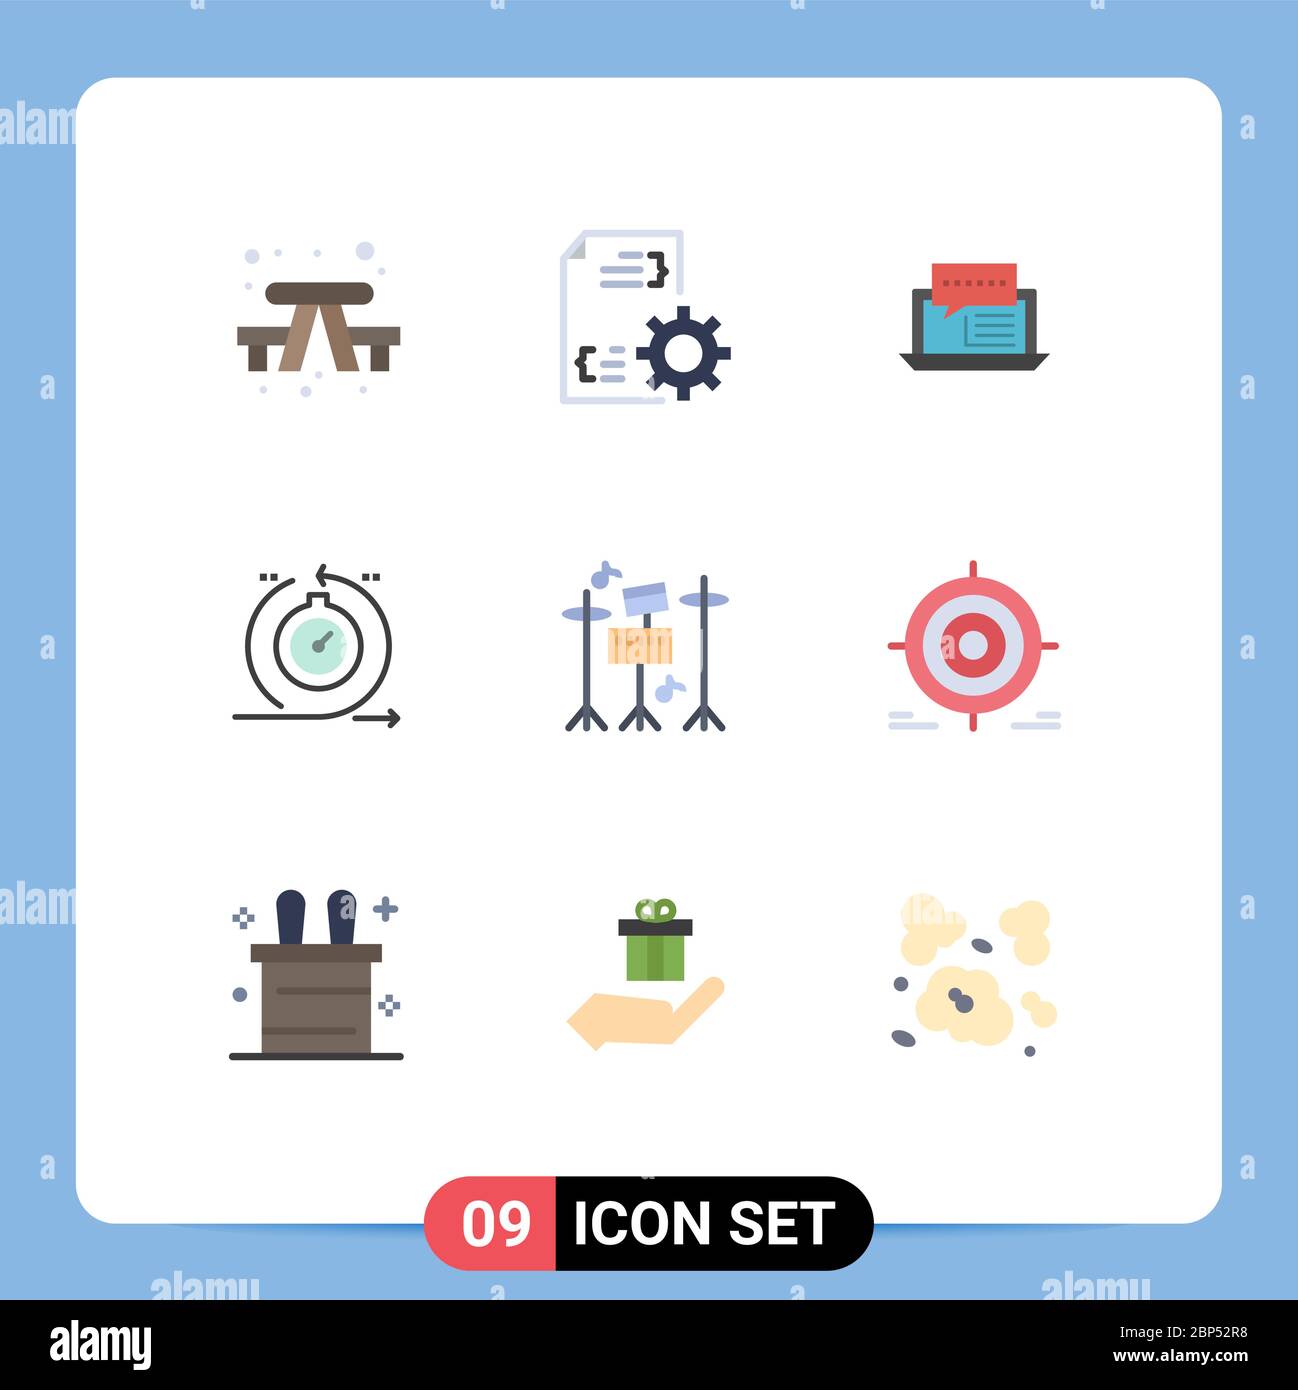 9 Creative Icons Modern Signs and Symbols of fast, cycle, consulting, agile, online Editable Vector Design Elements Stock Vector